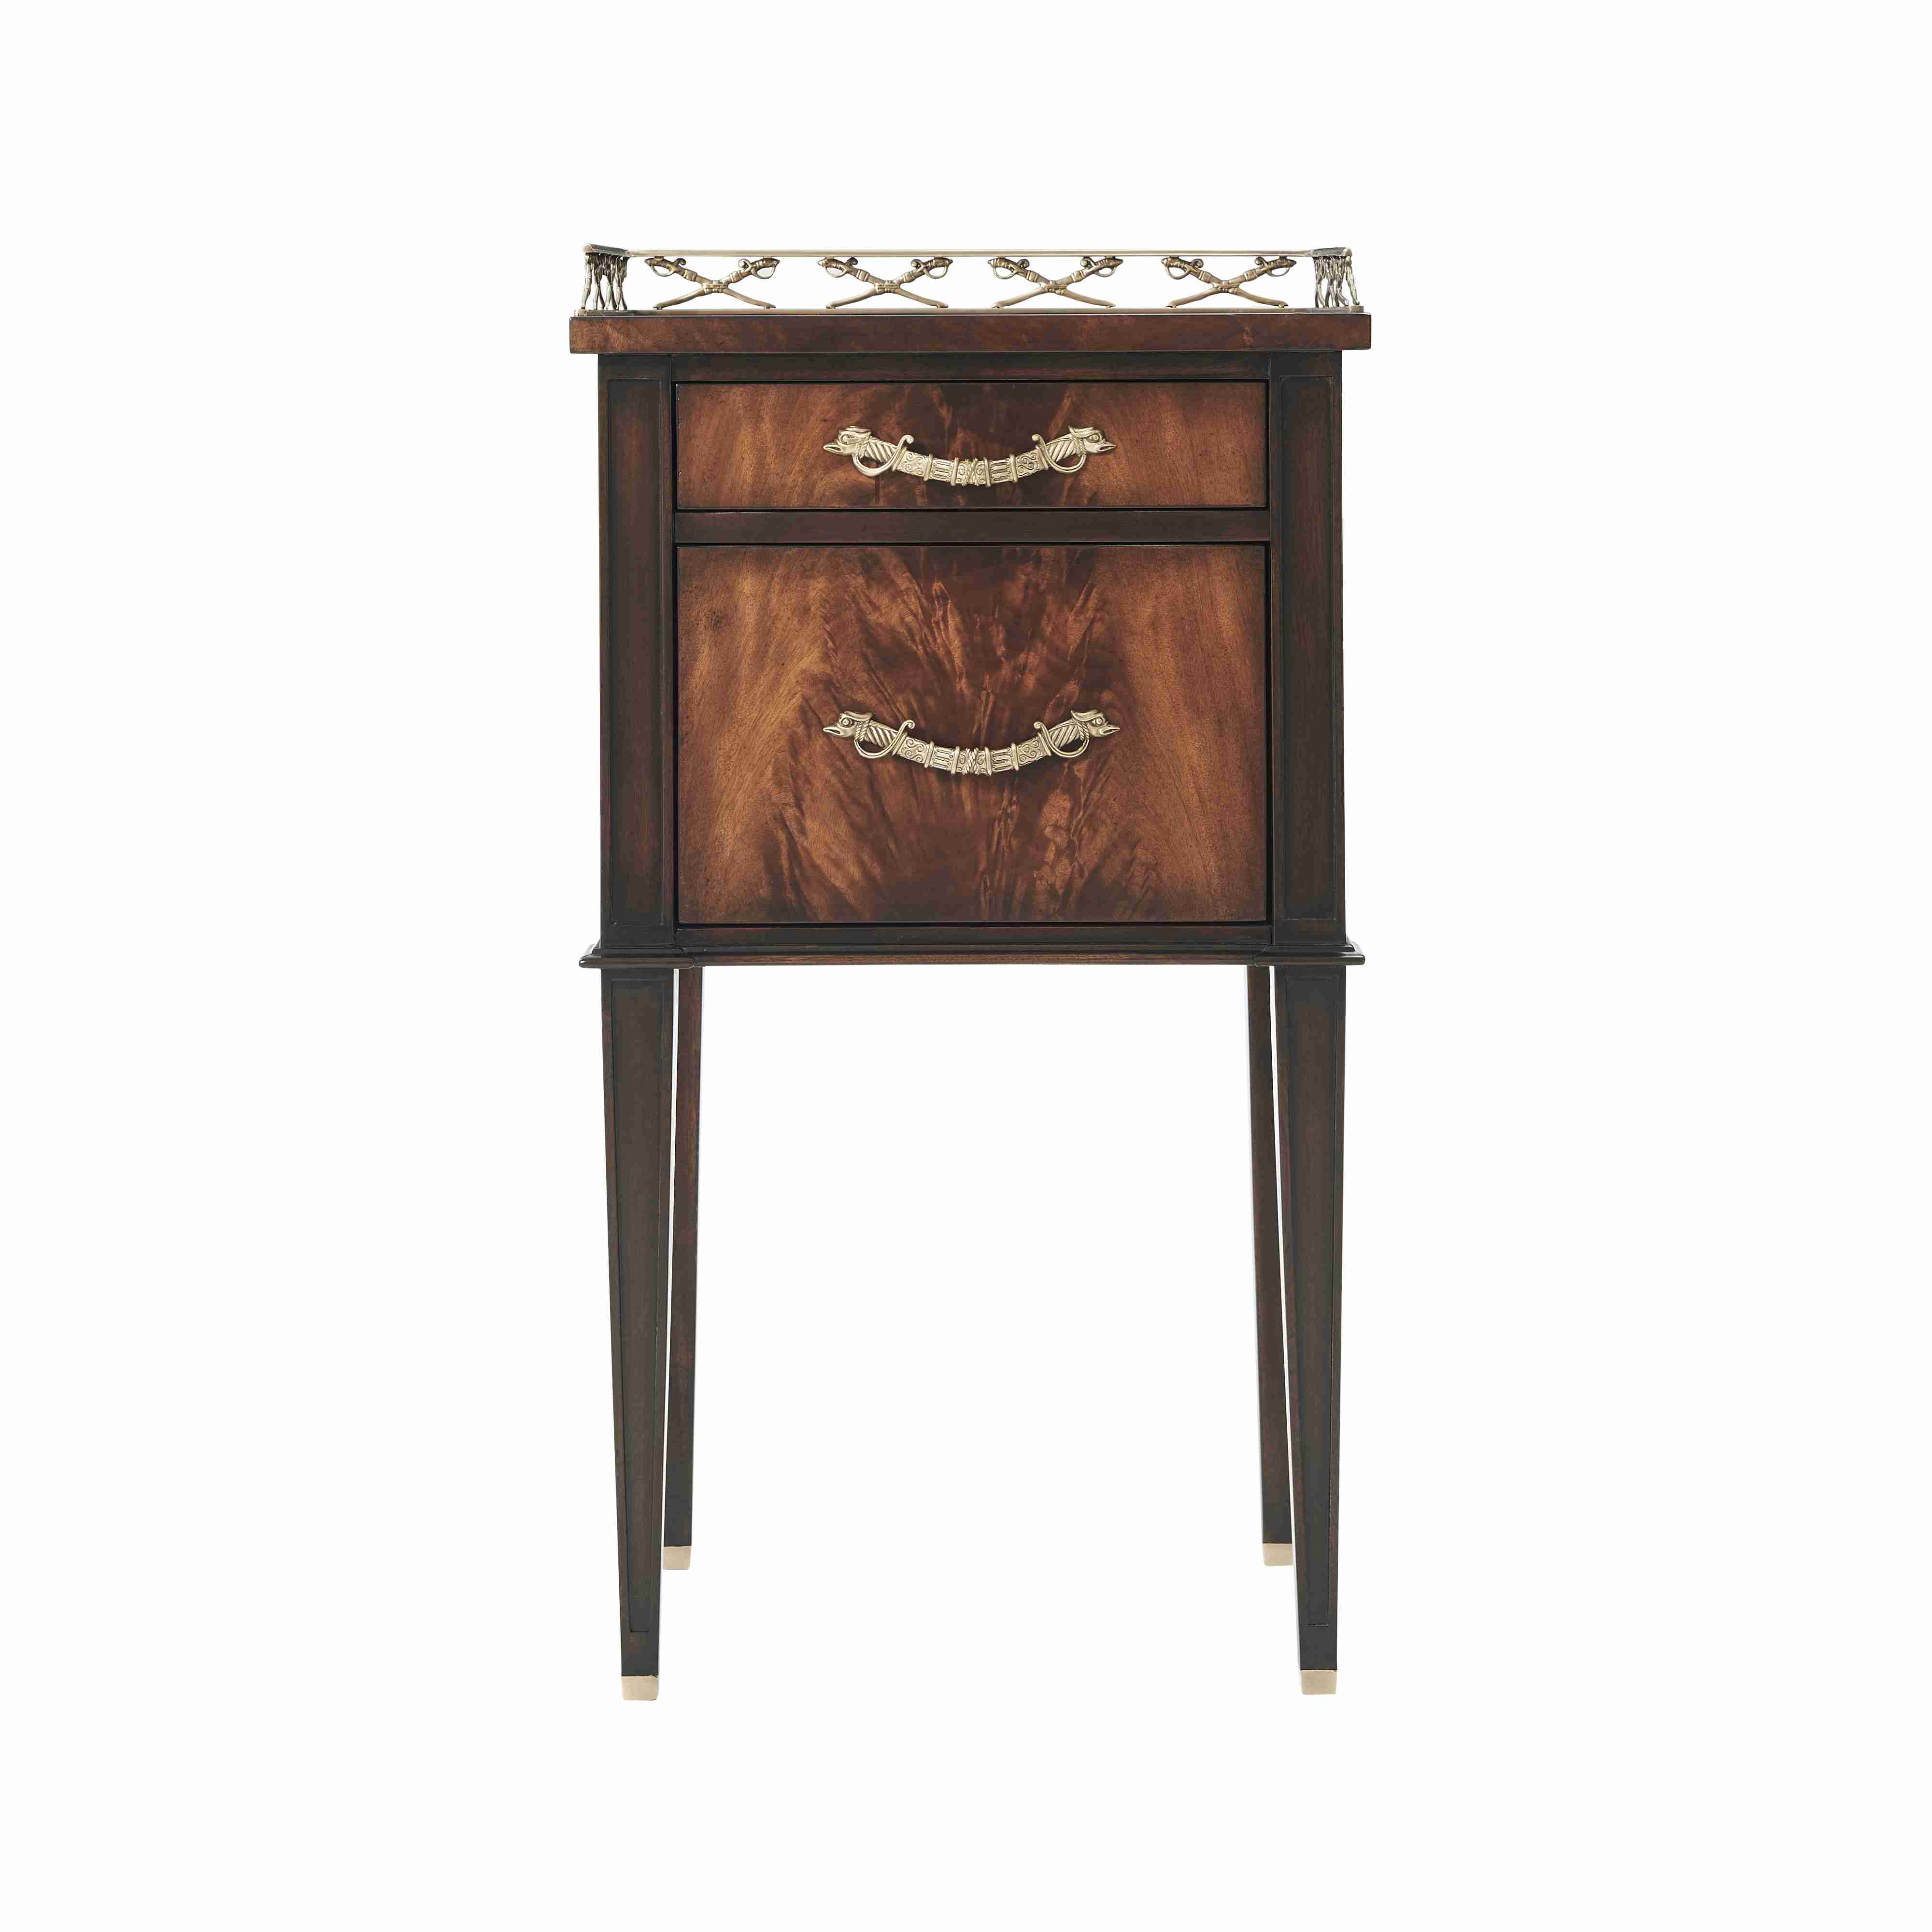 THE ADMIRALTY ACCENT TABLE